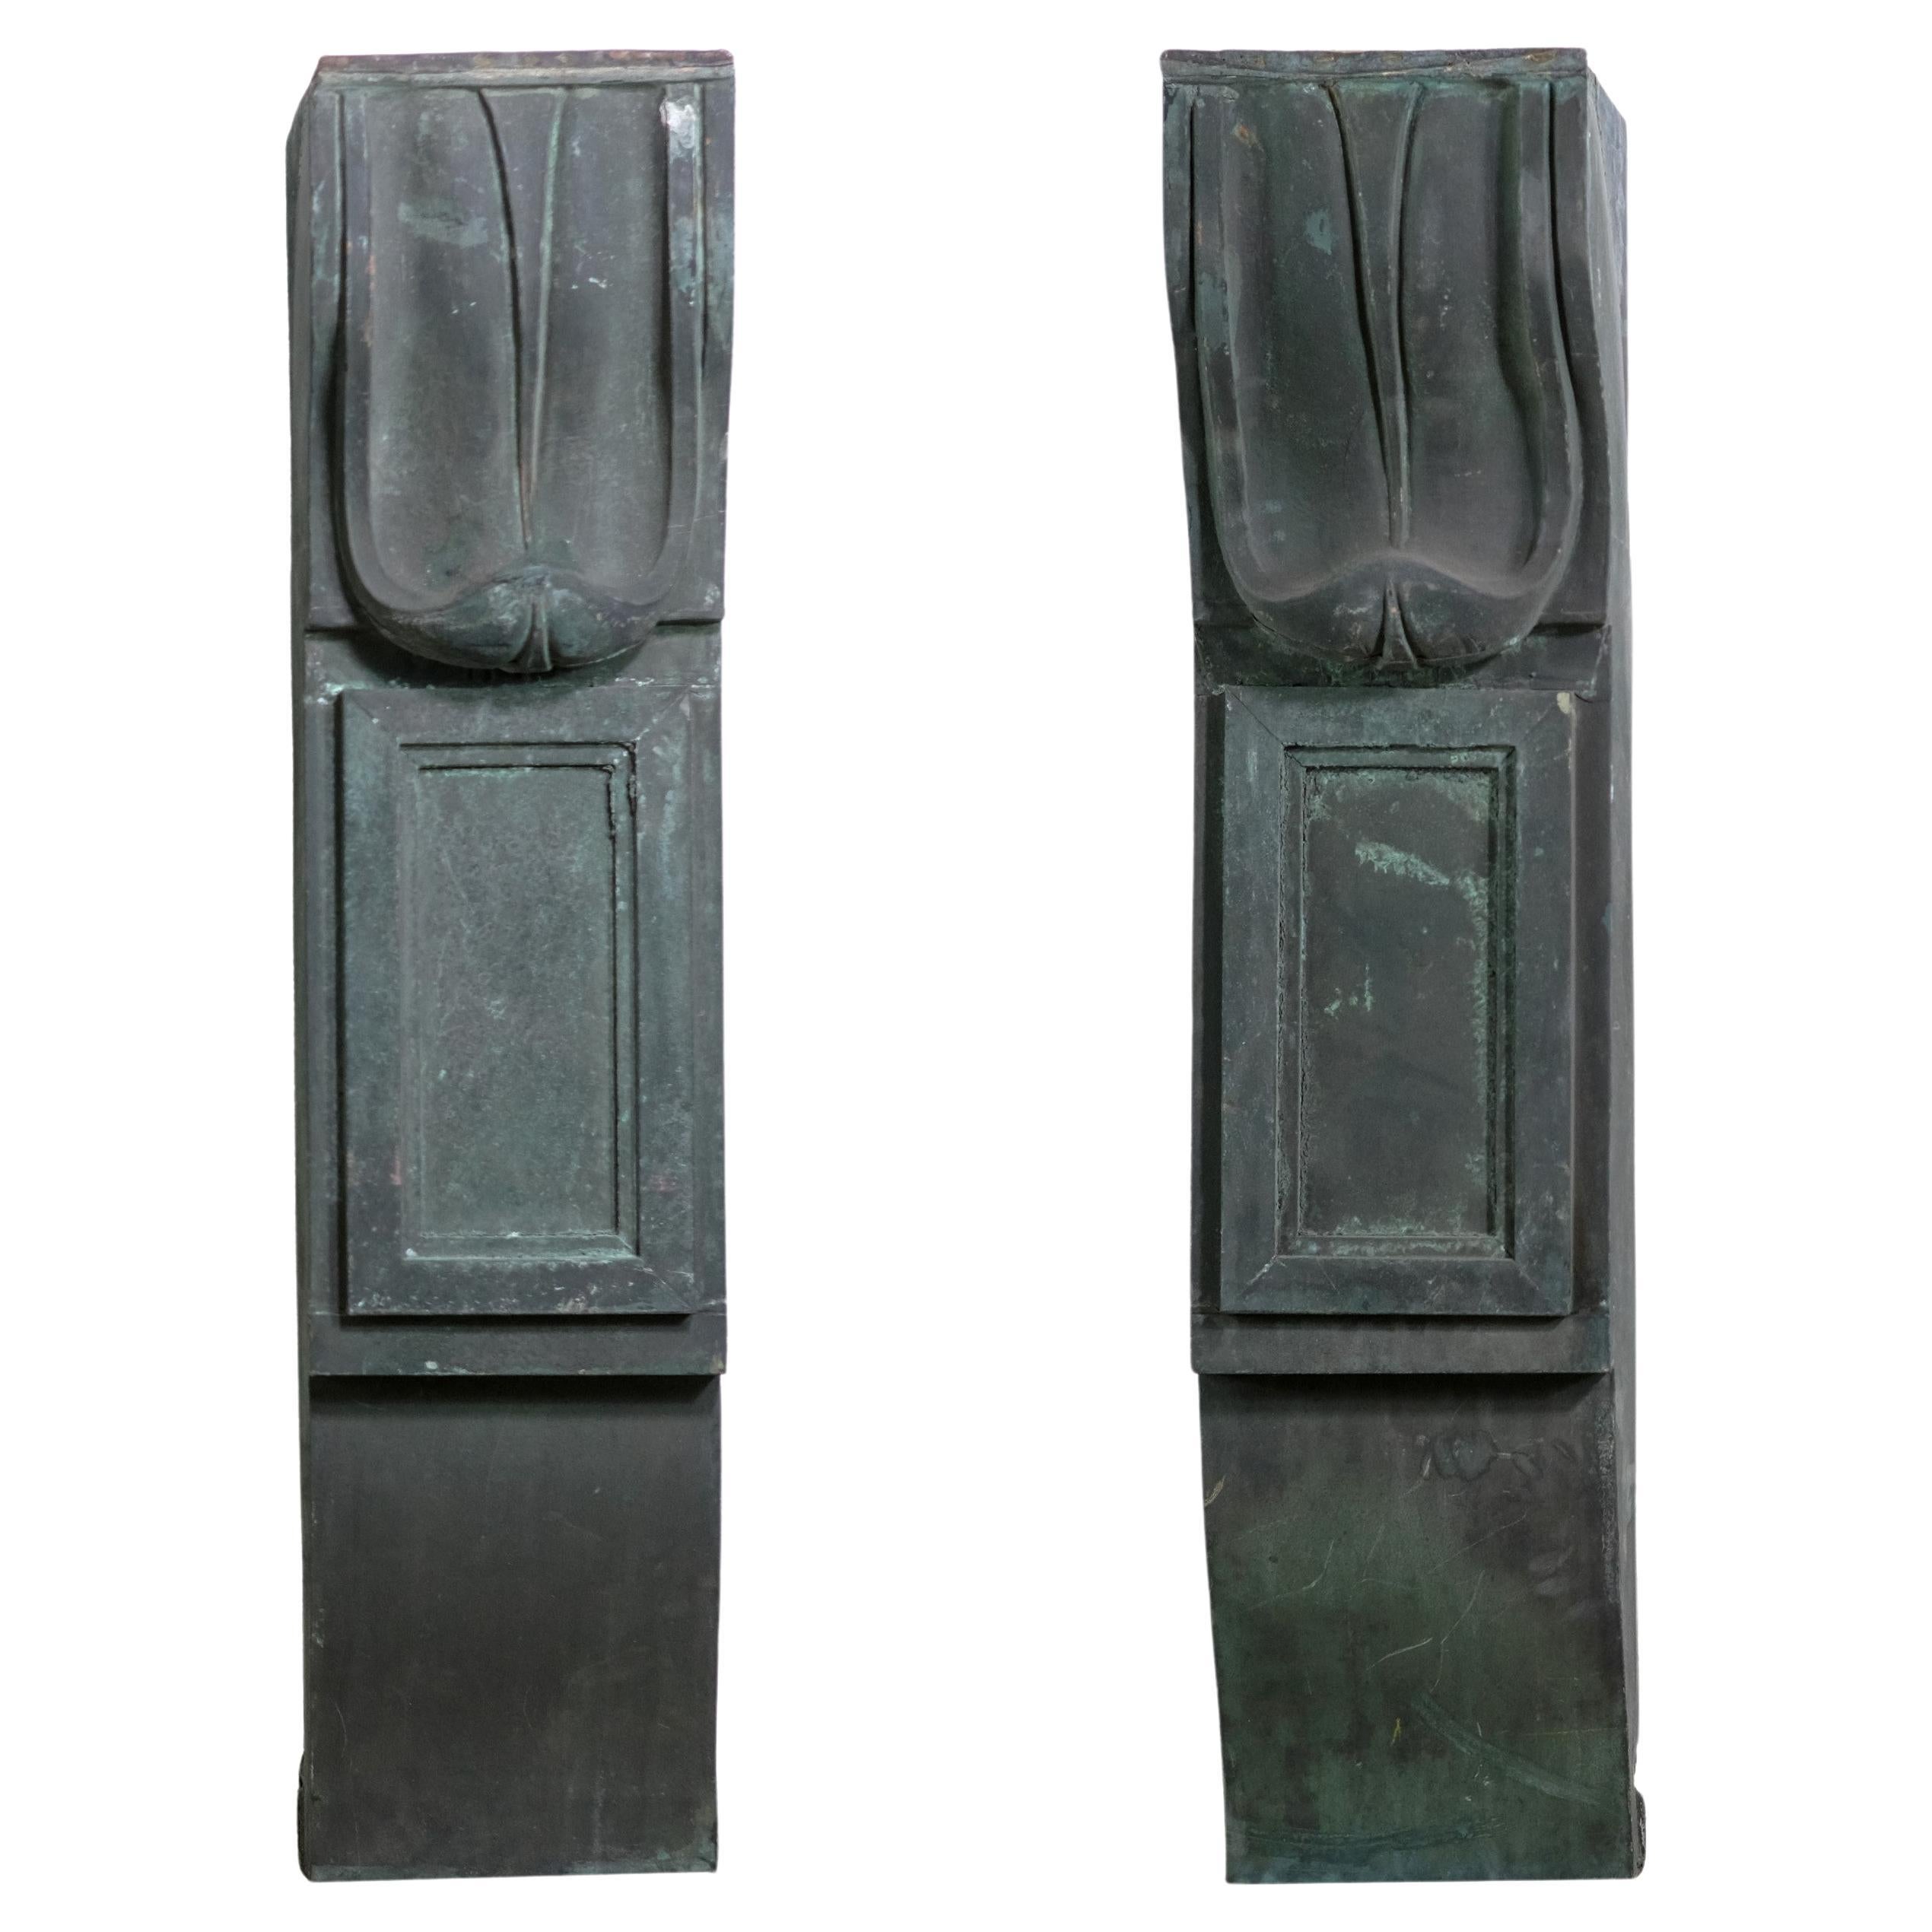 Pair Beaux Arts Tall Copper Corbel Wall Pieces NYC Building 417 Park Ave For Sale